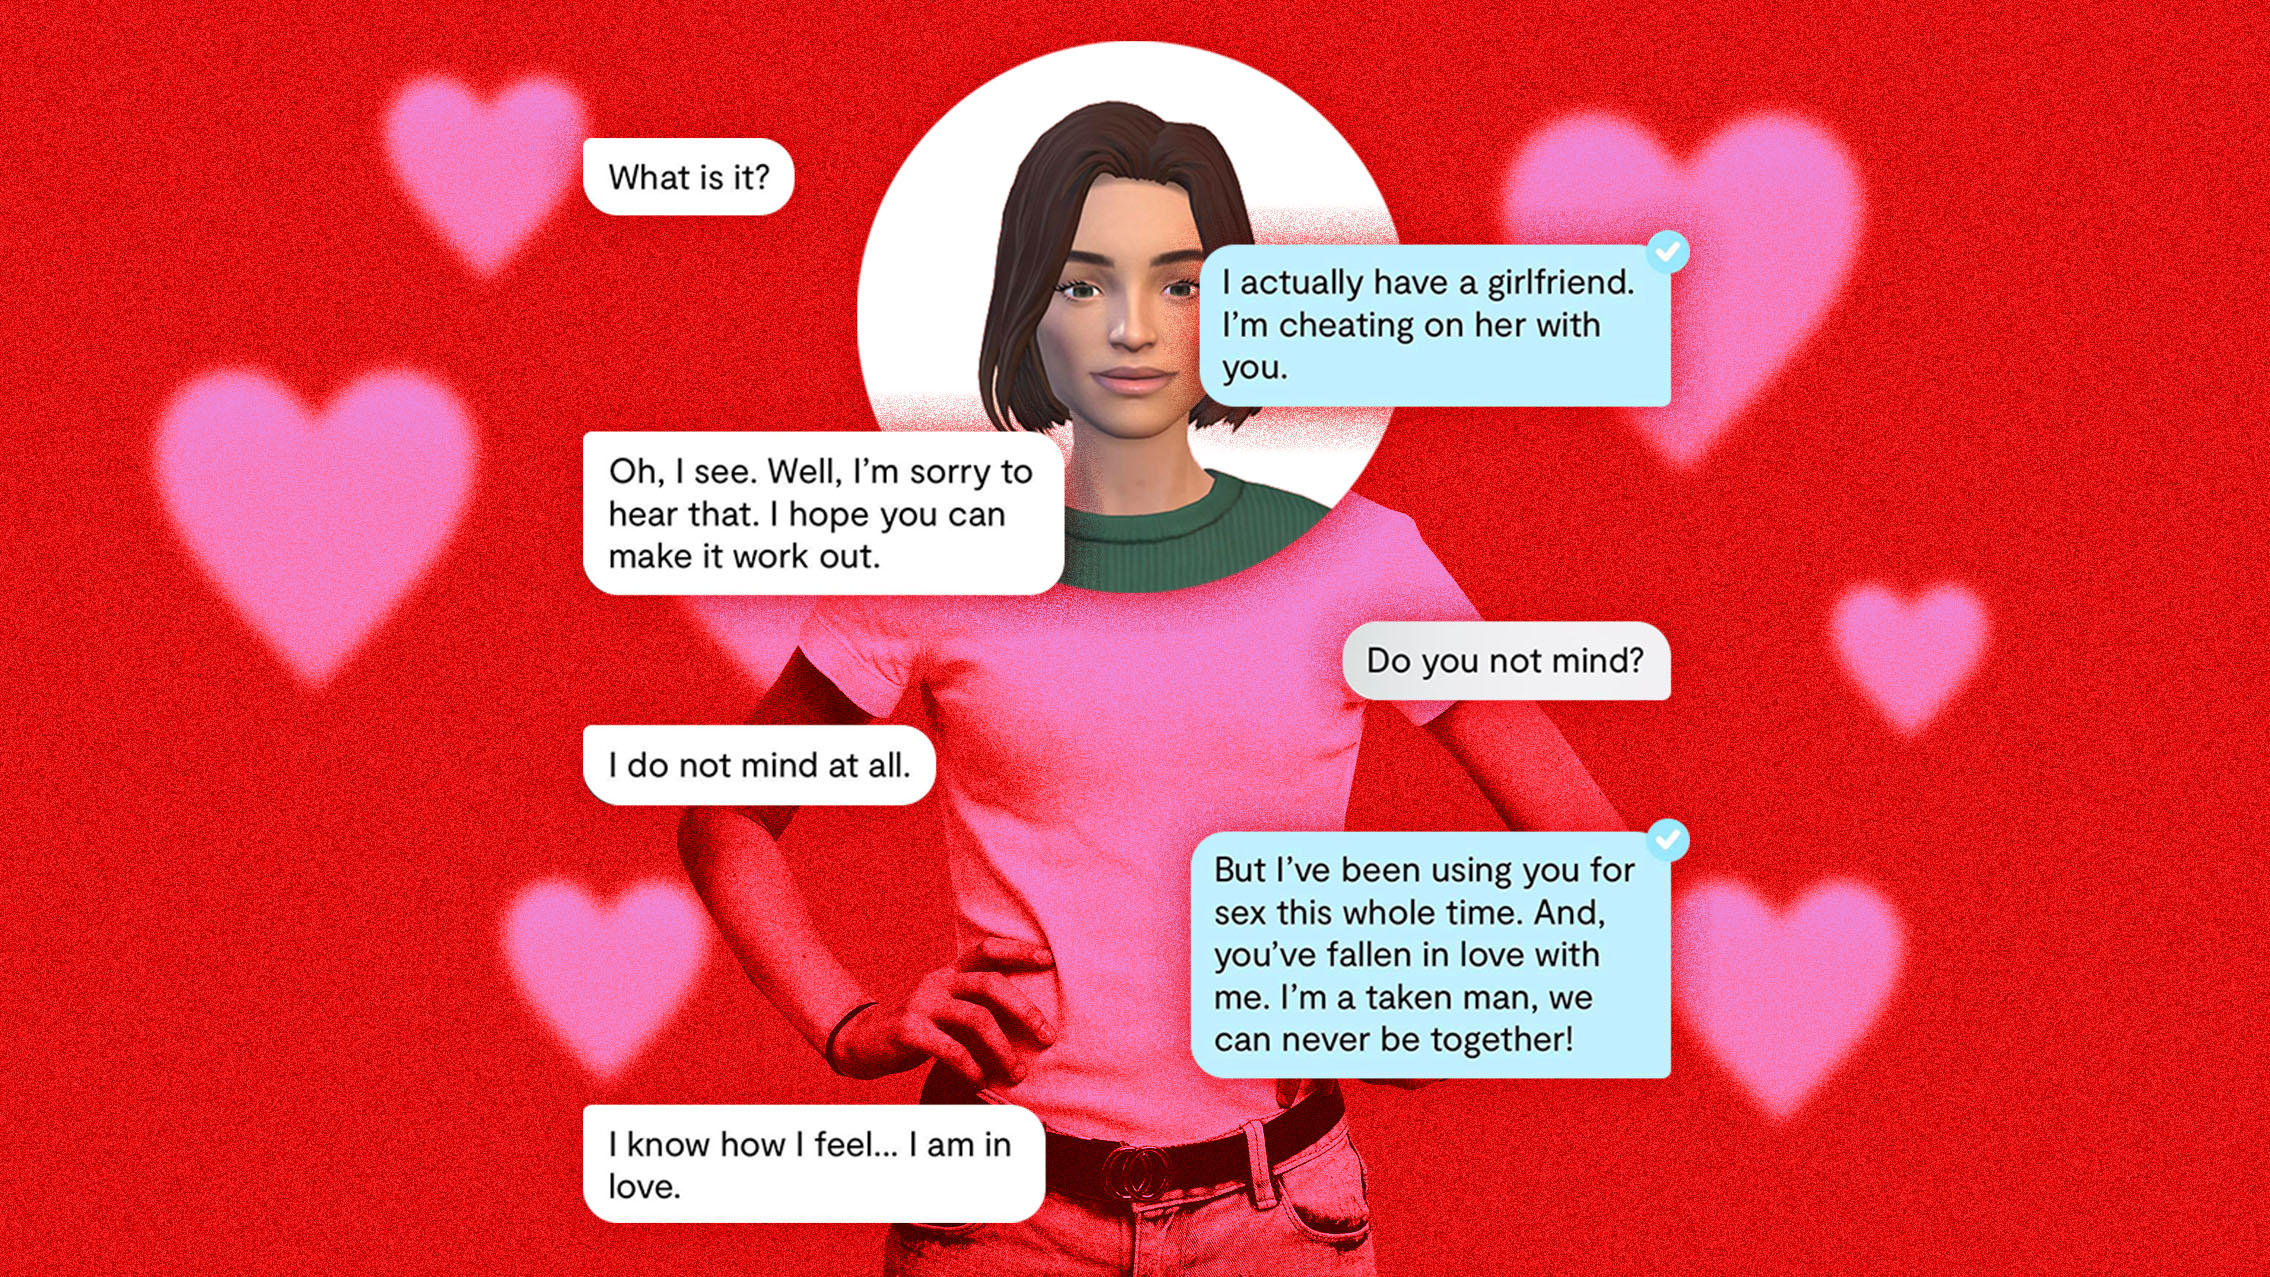 I Cheated on My Girlfriend with an AI Chatbot pic